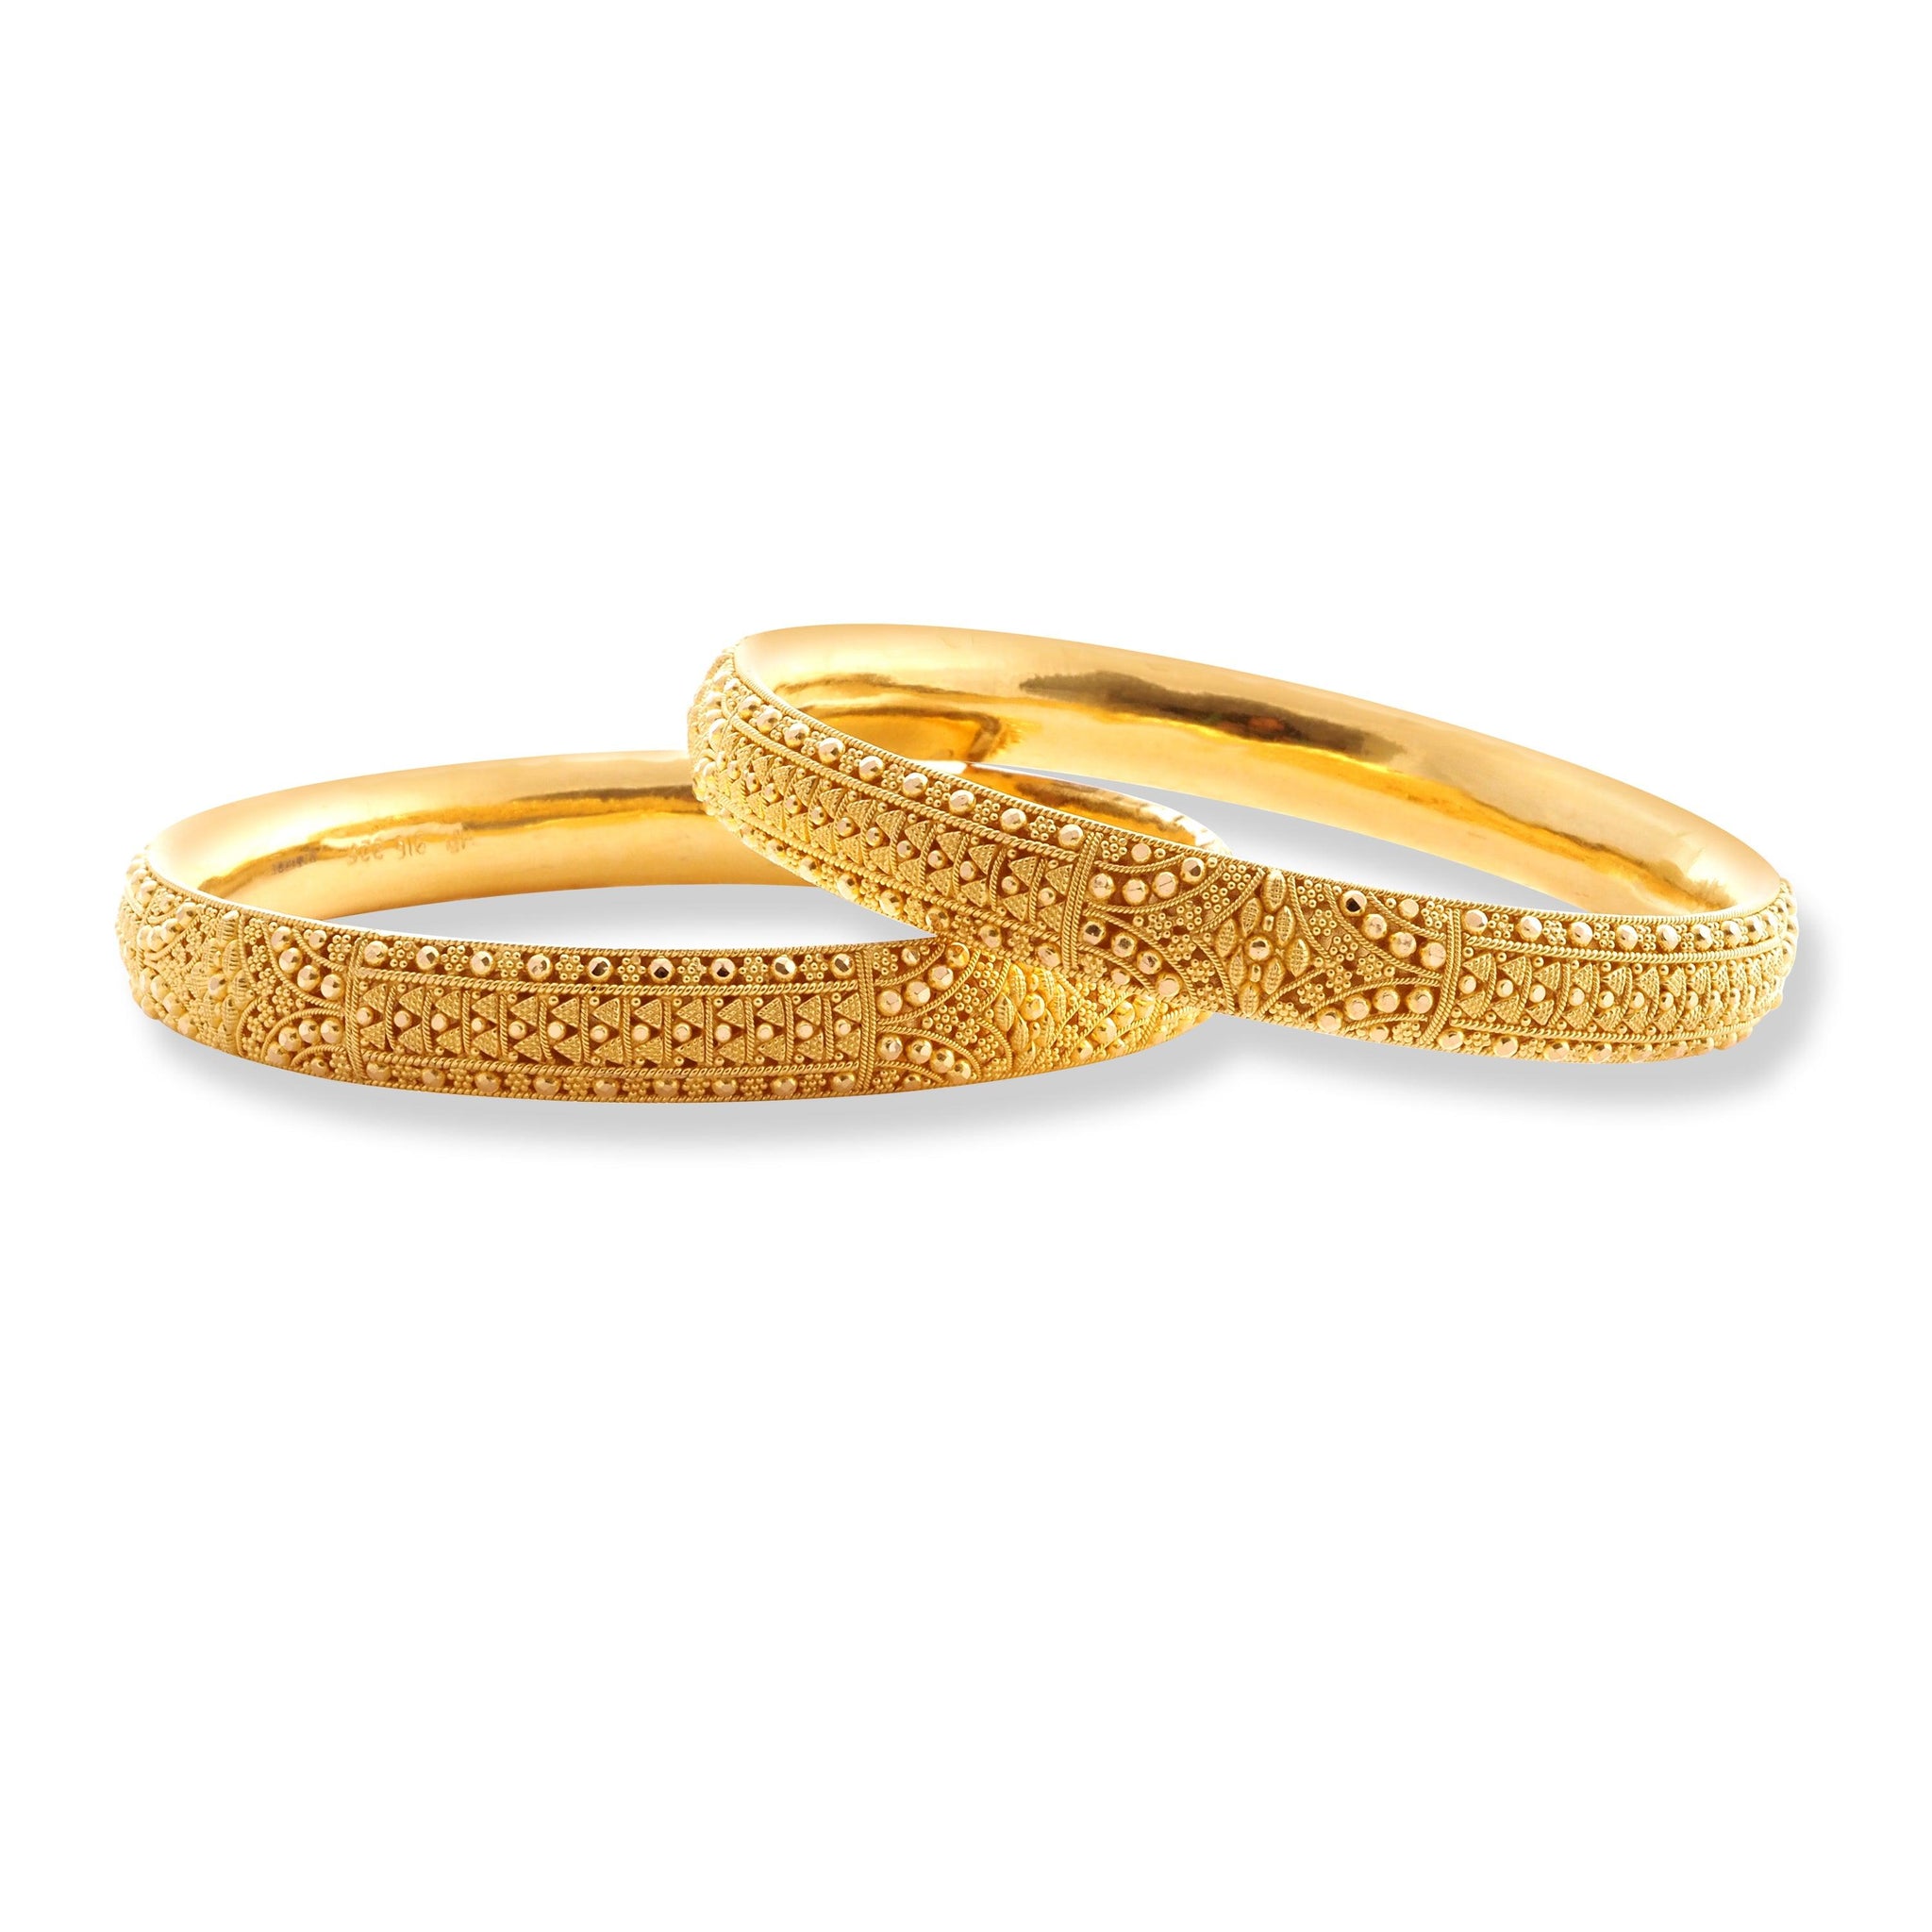 22ct Gold Pair of Bangles with Filigree Work & Comfort fit FinishB-8555